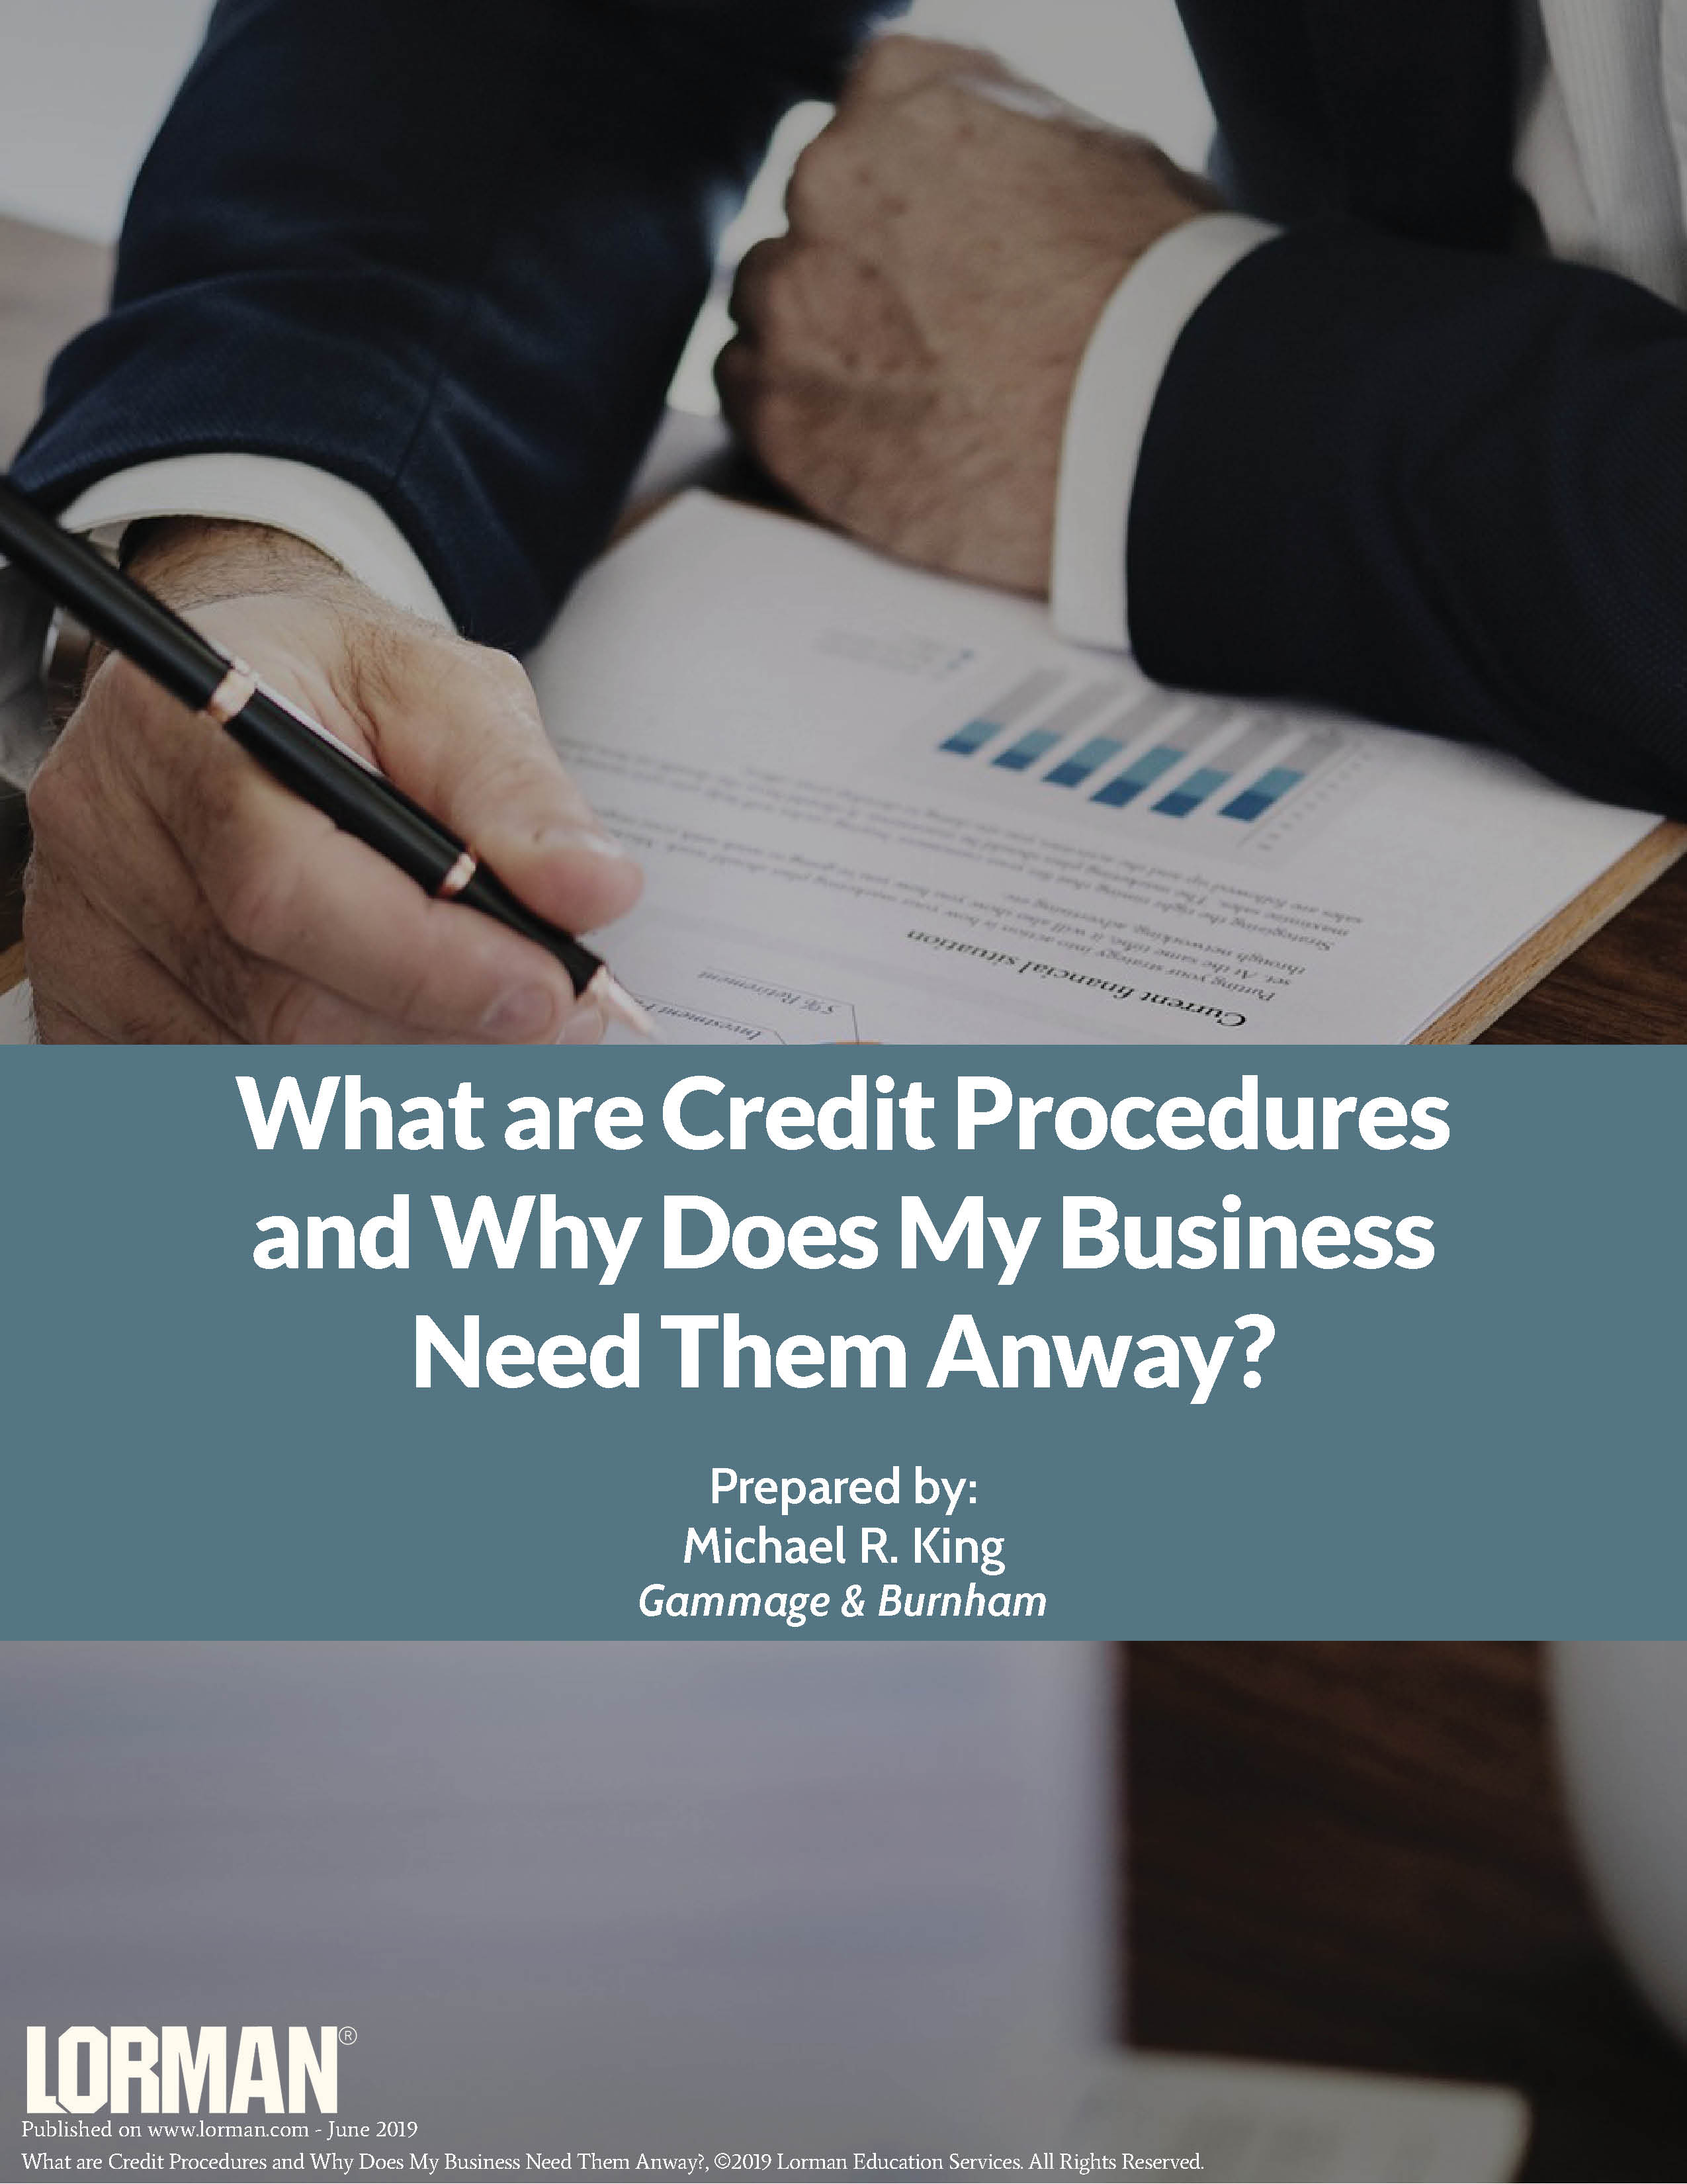 What are Credit Procedures?